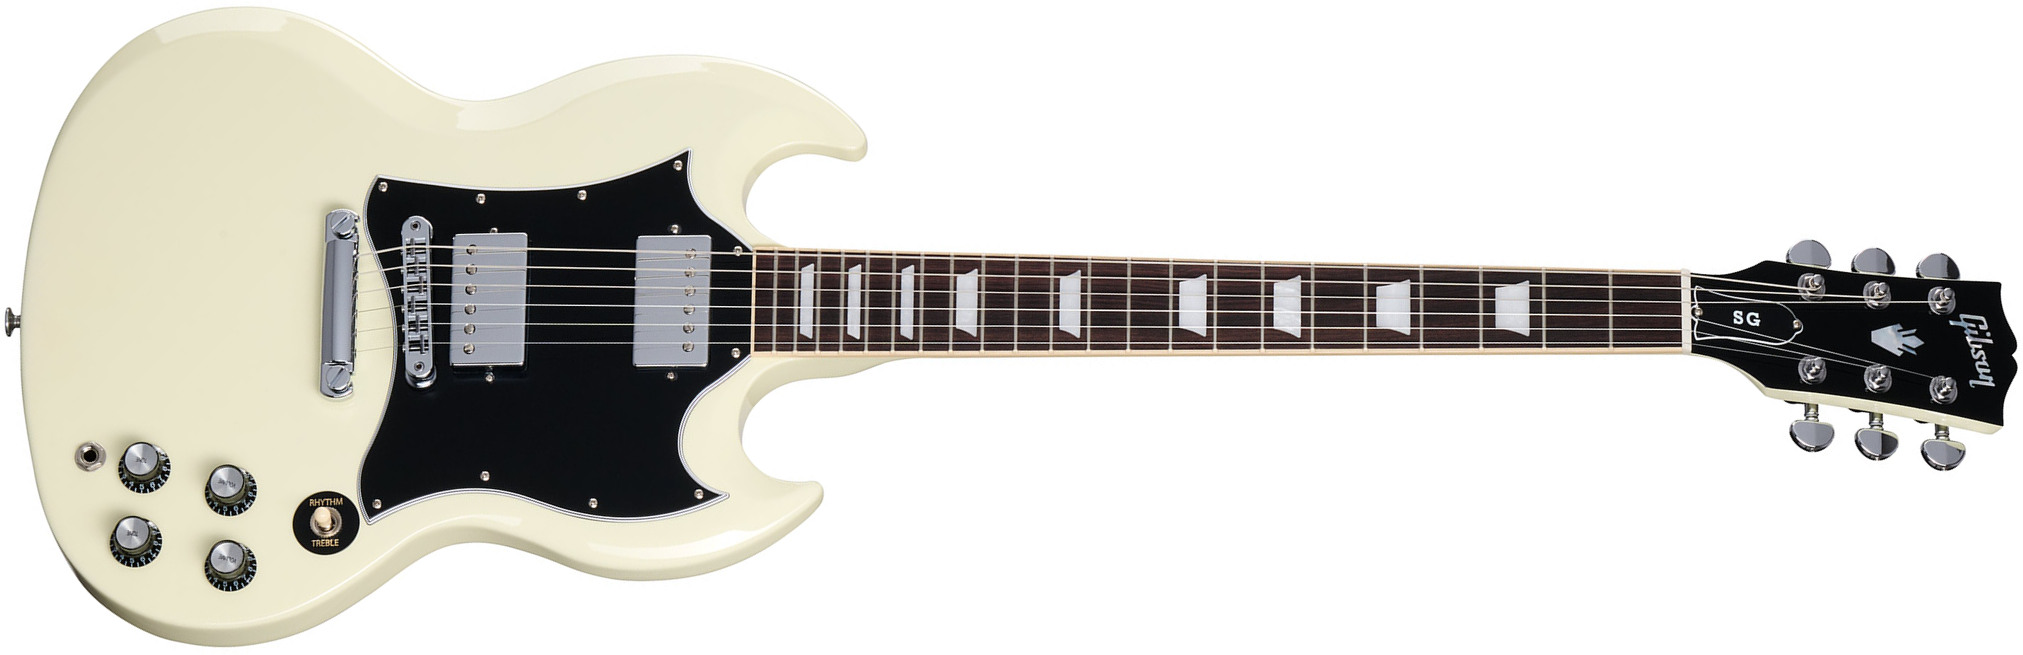 Gibson Sg Standard Custom Color 2h Ht Rw - Classic White - Double cut electric guitar - Main picture